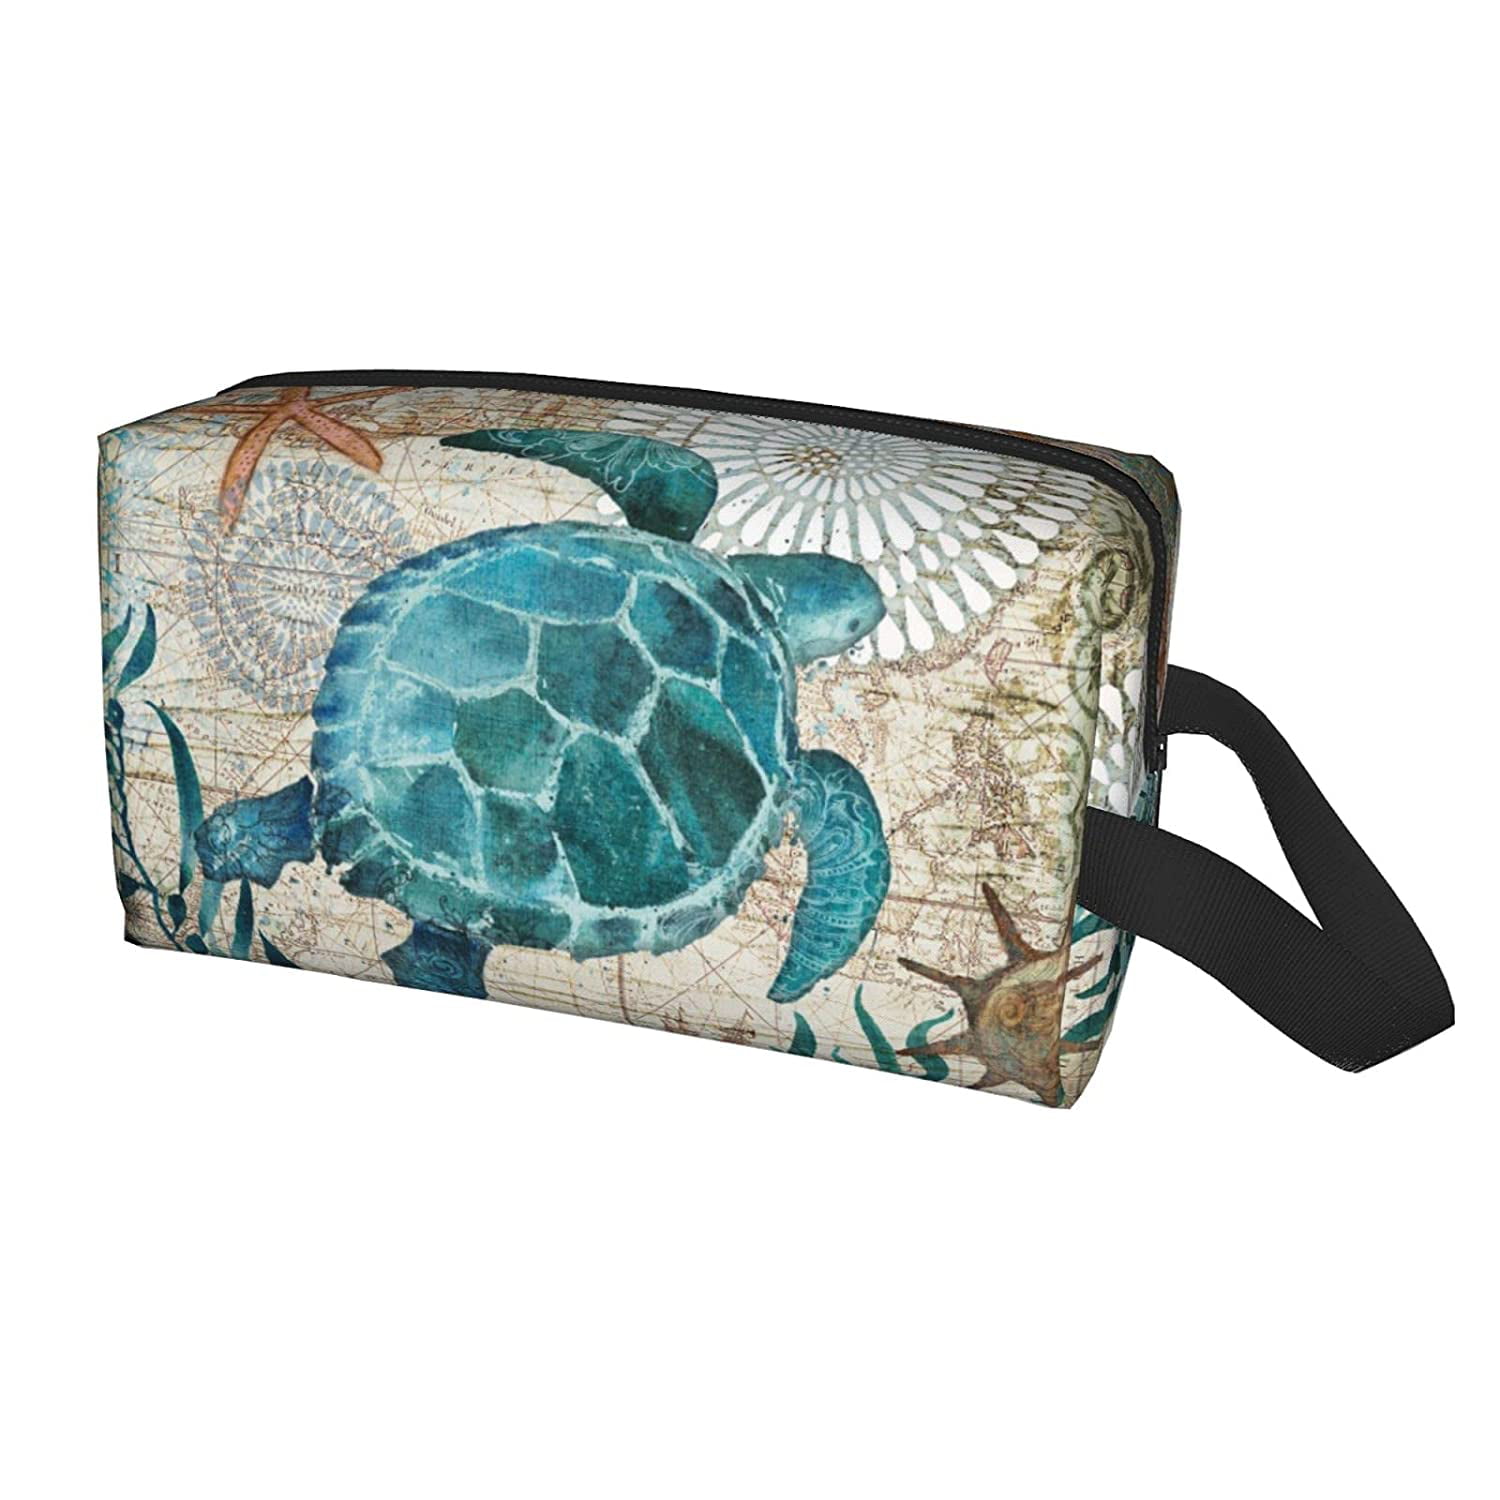 Tropical Fish And Sea Turtle Messenger Bag Crossbody Bag Large Durable Shoulder School Or Business Bag Oxford Fabric For Mens Womens 